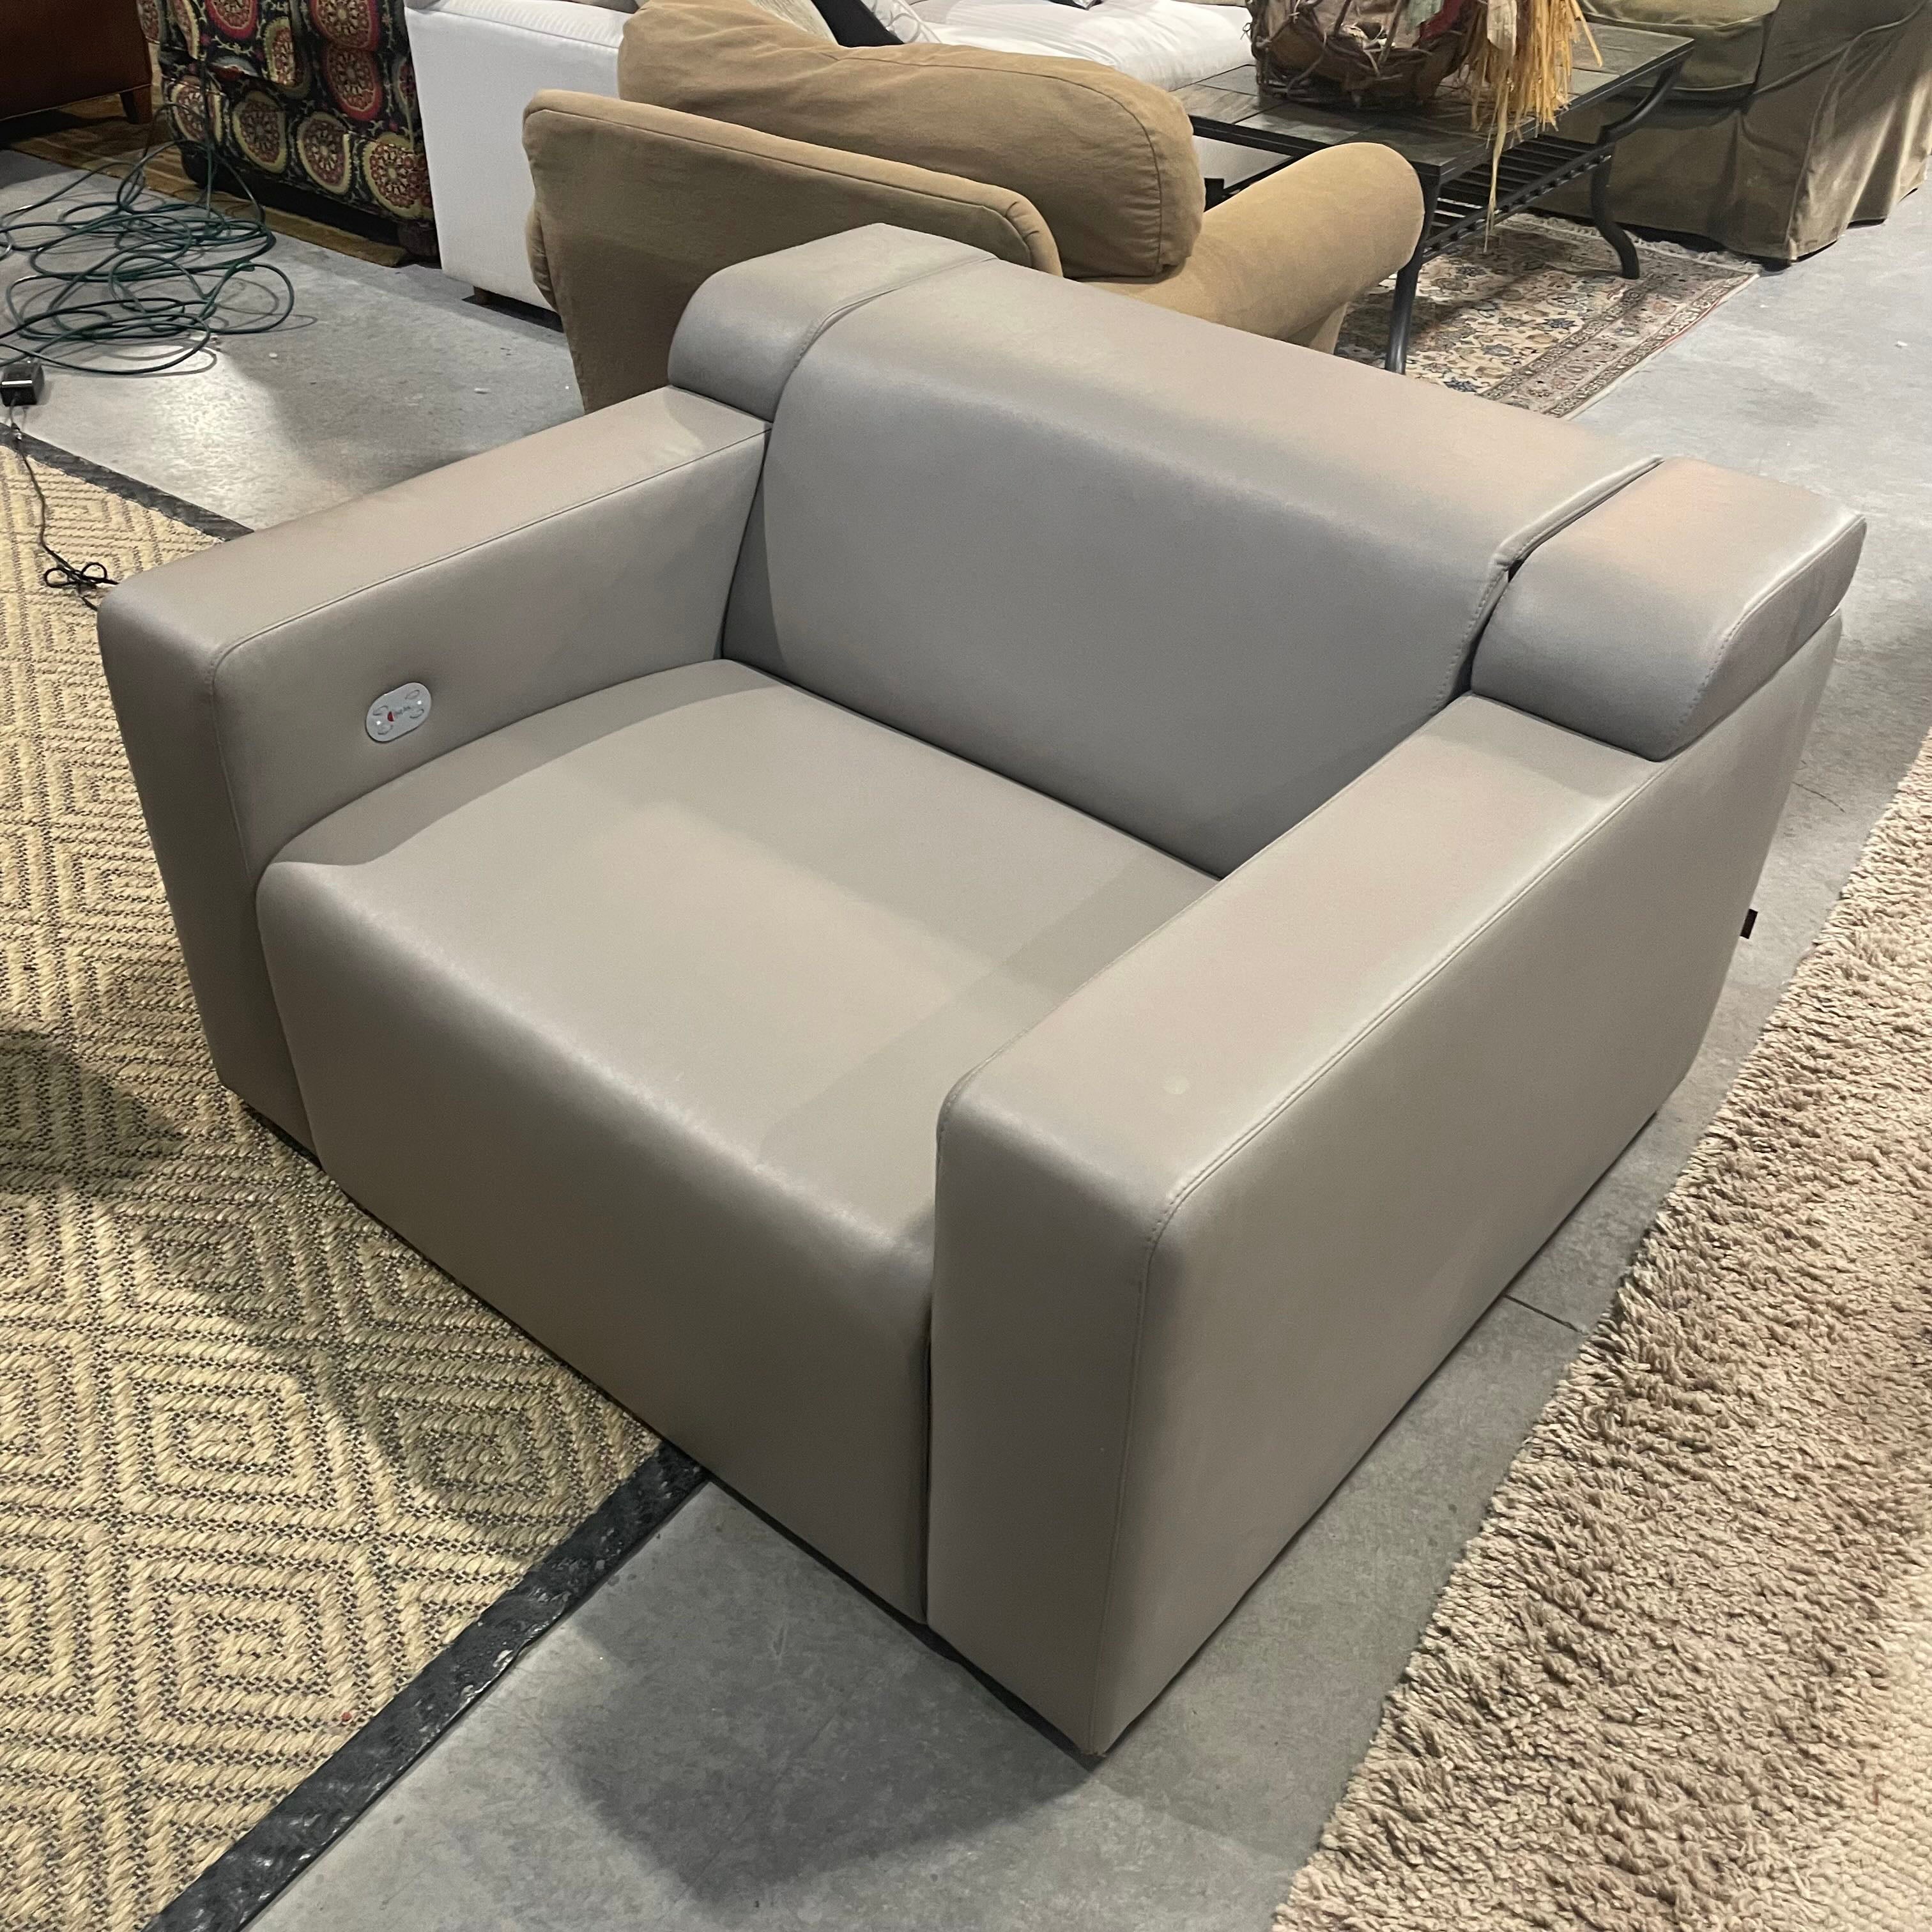 46"x 43"x 28" Cineak Taupe Grey Leather Power Reclining Theatre Seating